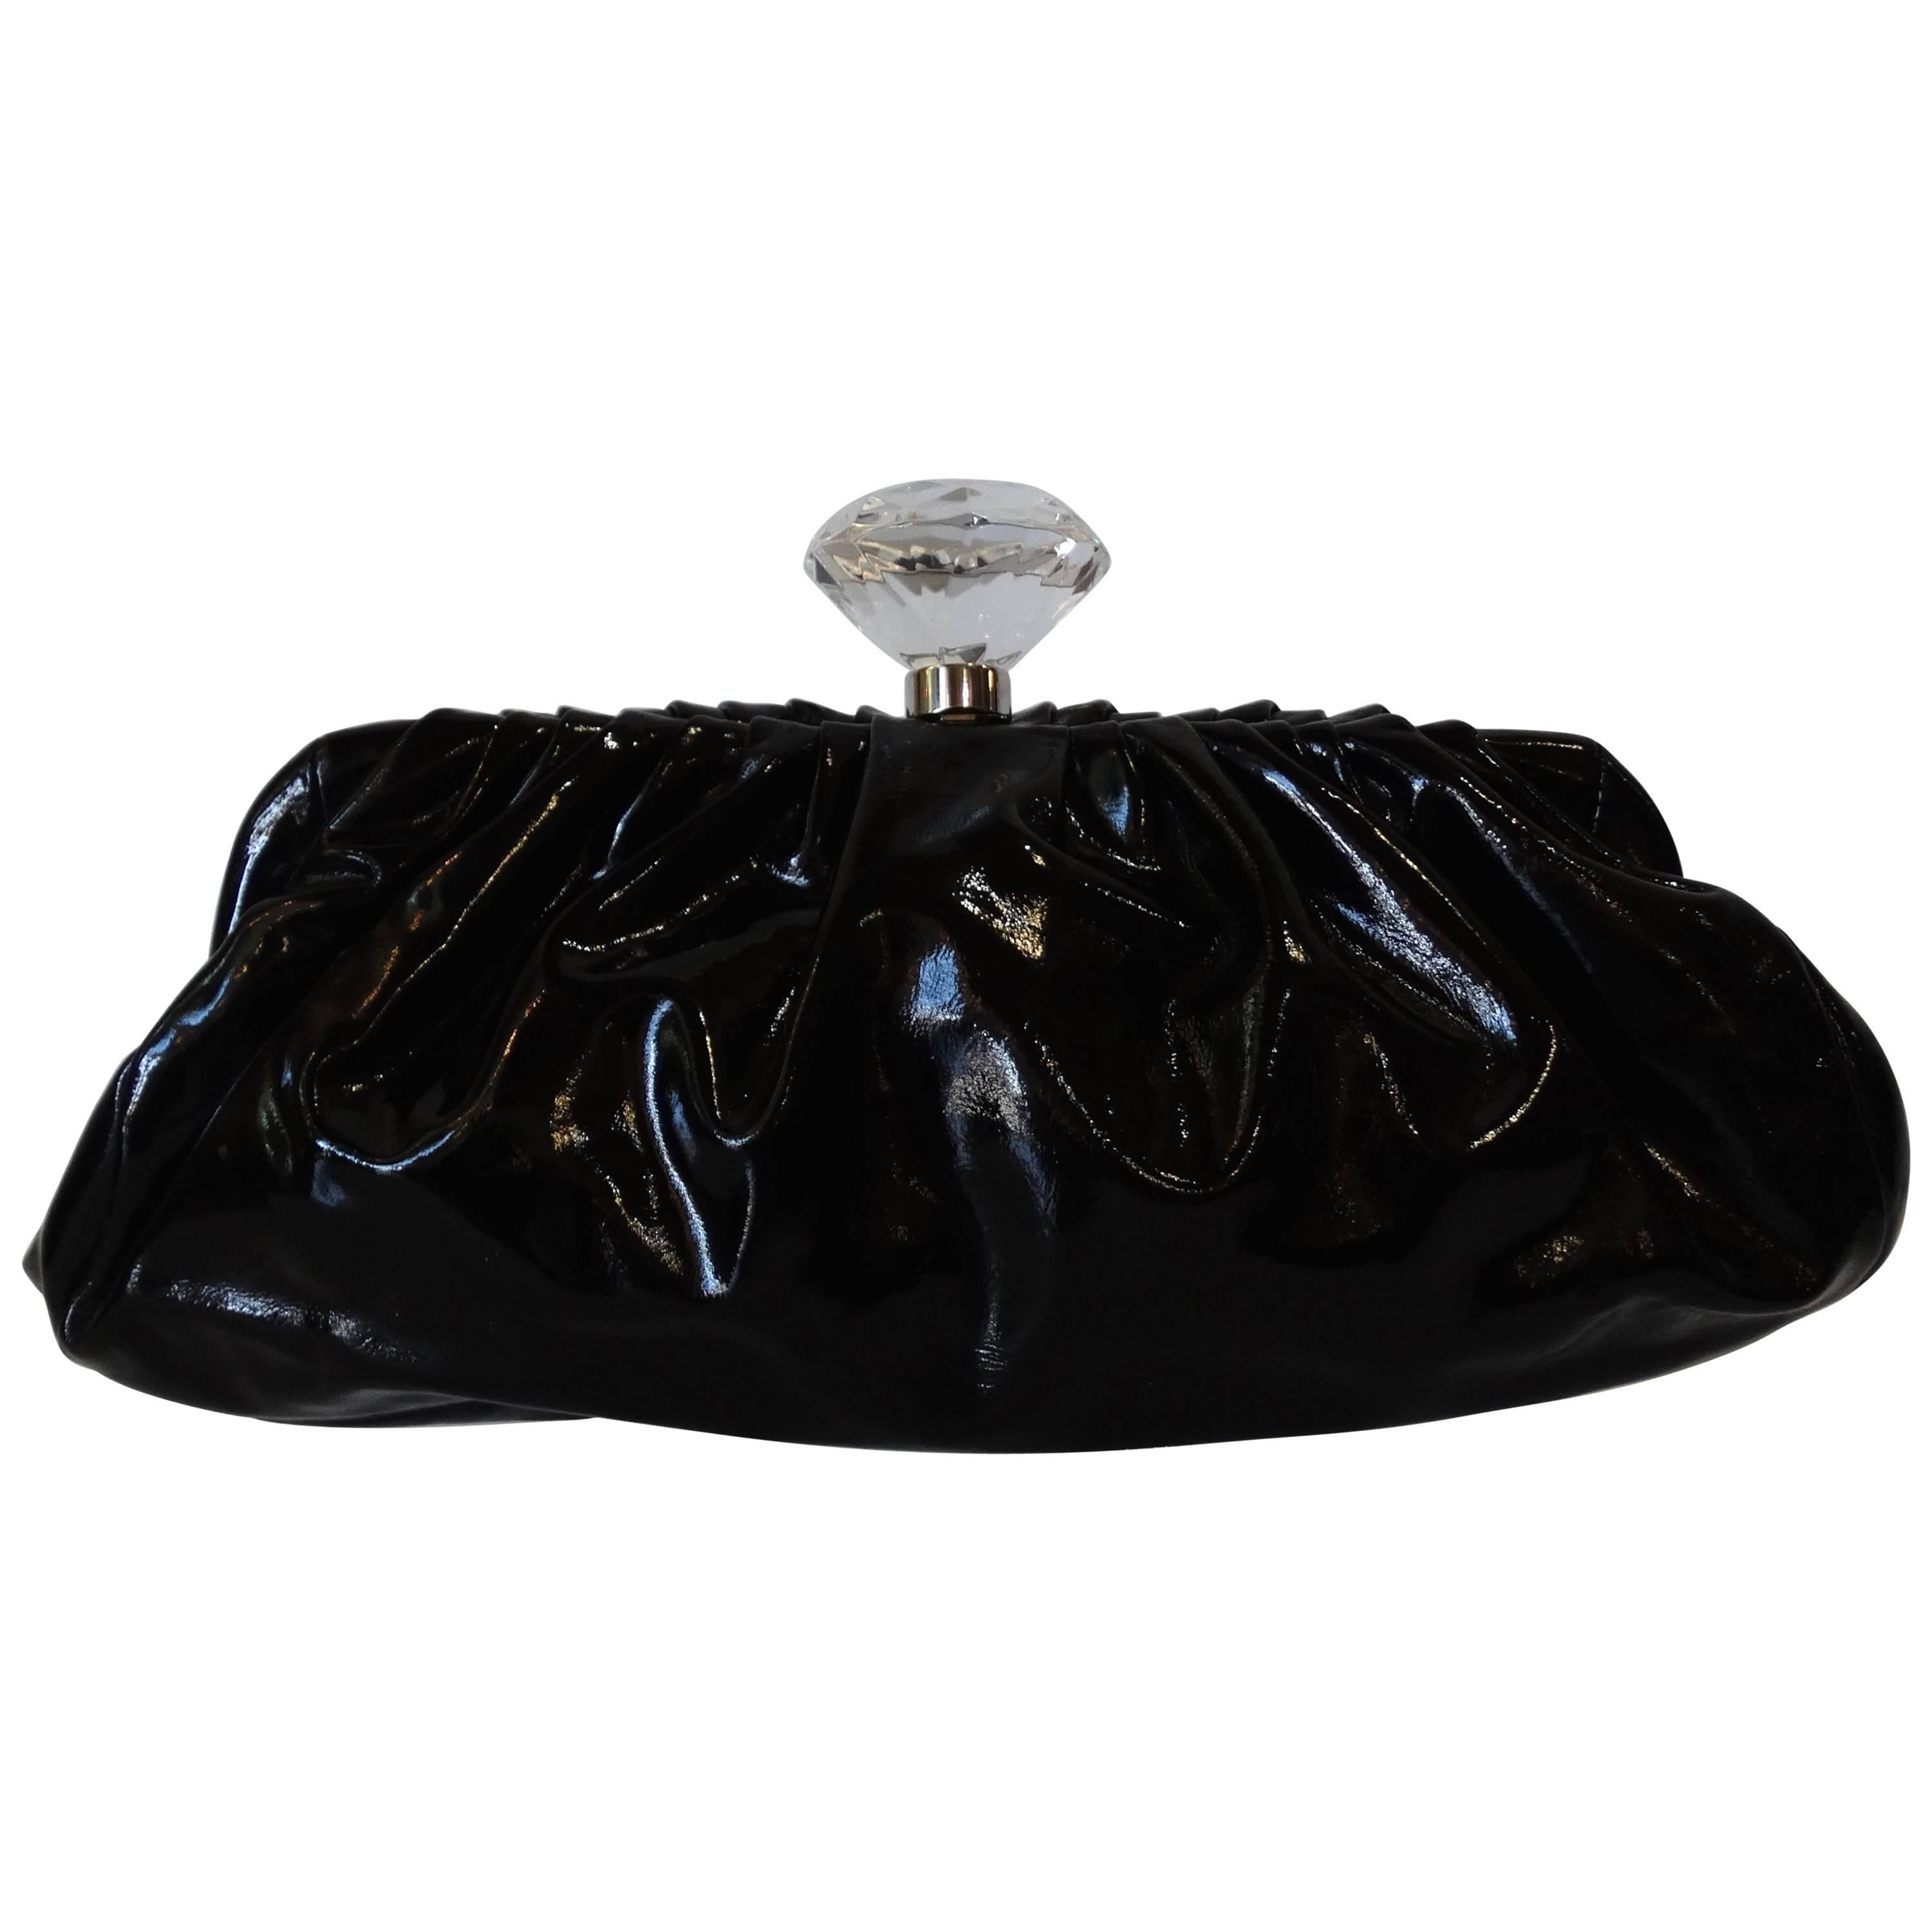 2000s Chanel Diamond Patent Leather Clutch